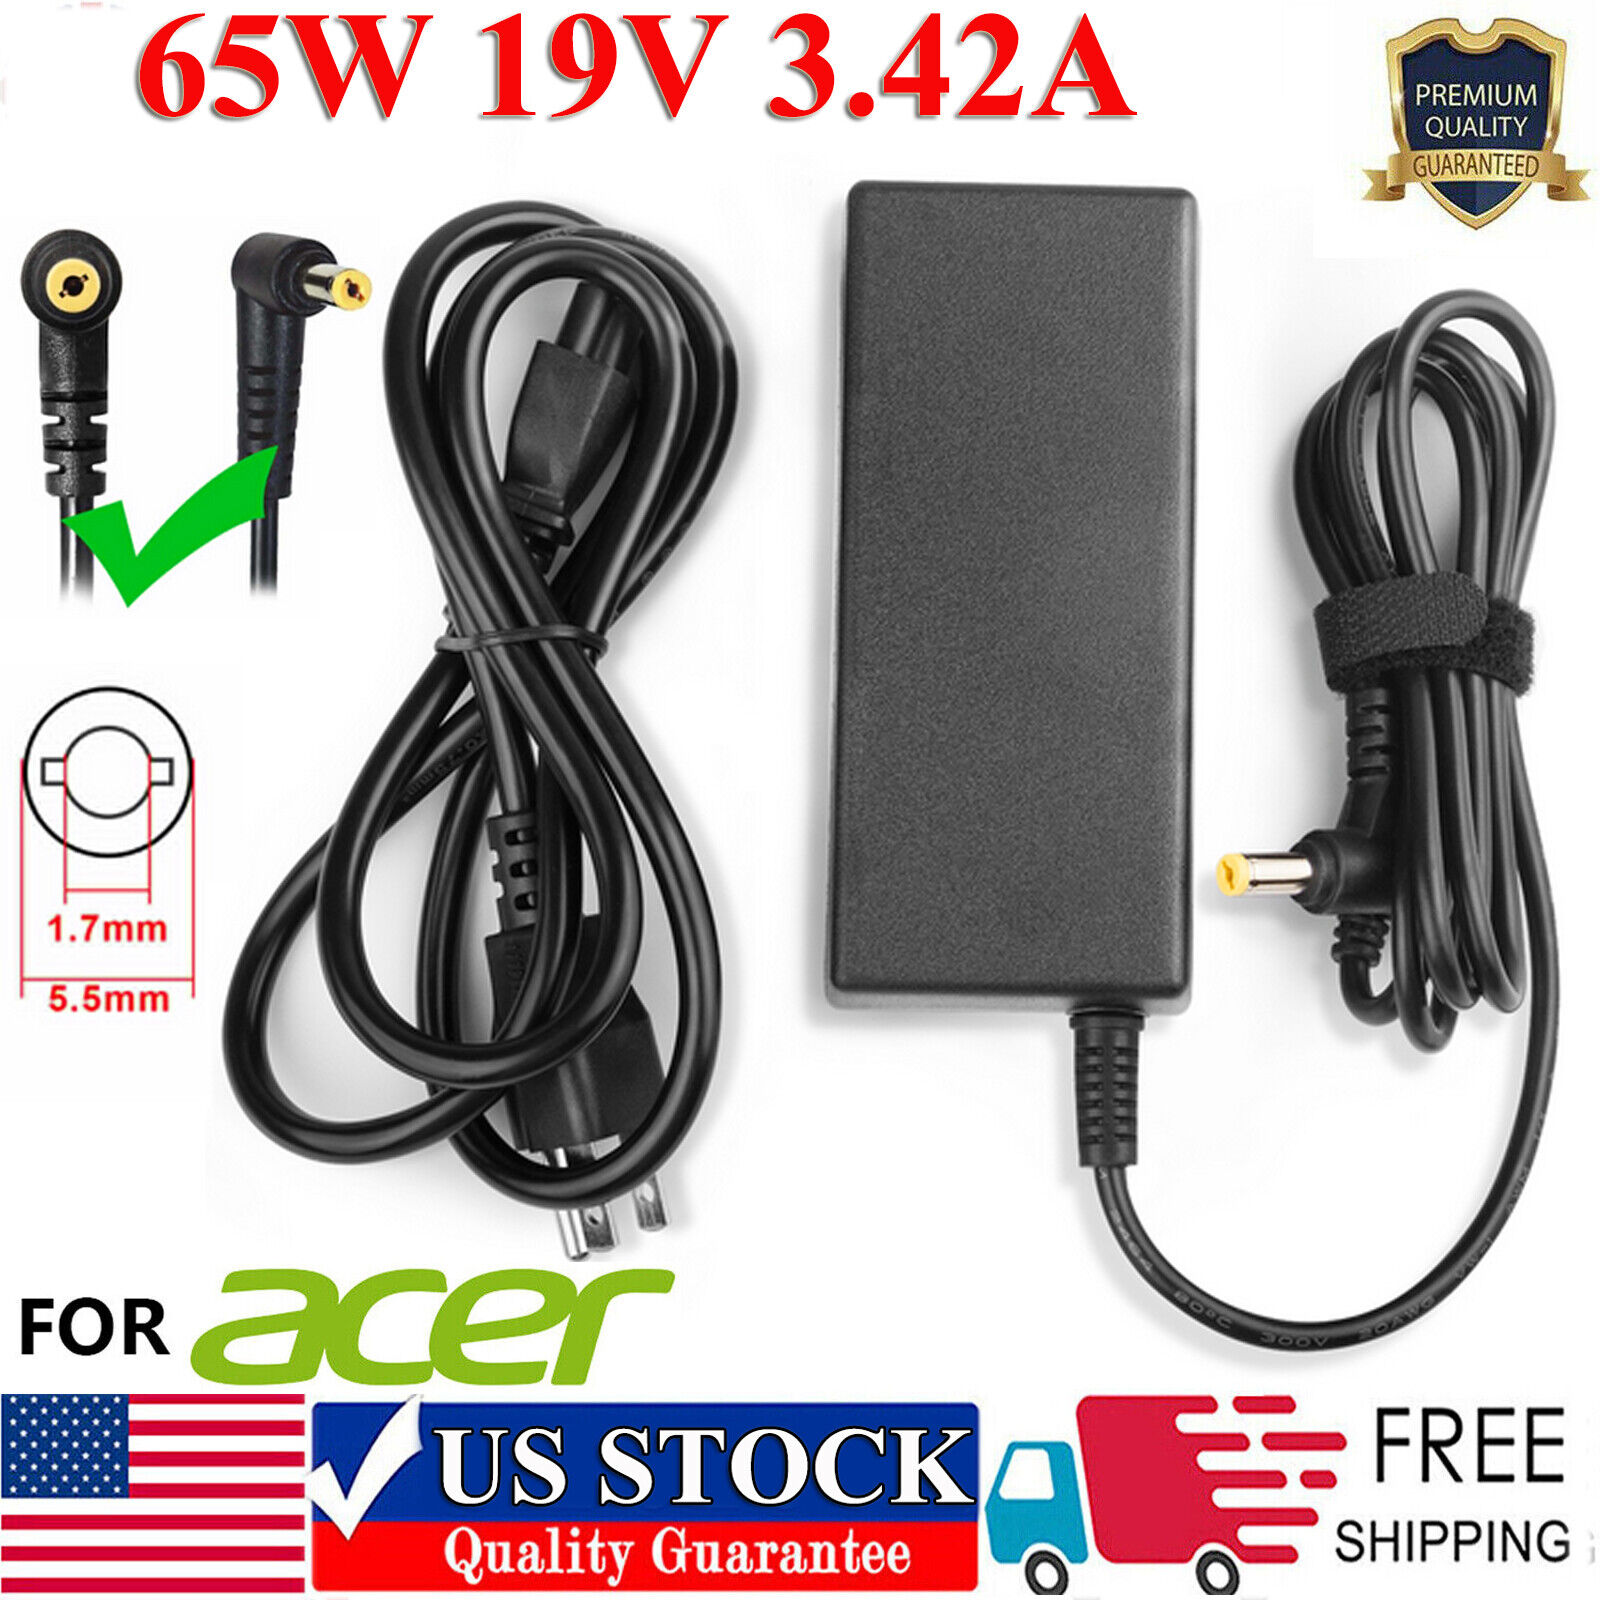 65W AC Power Supply Adapter Charger for Acer G226HQL G236HL G246HL LCD Monitor